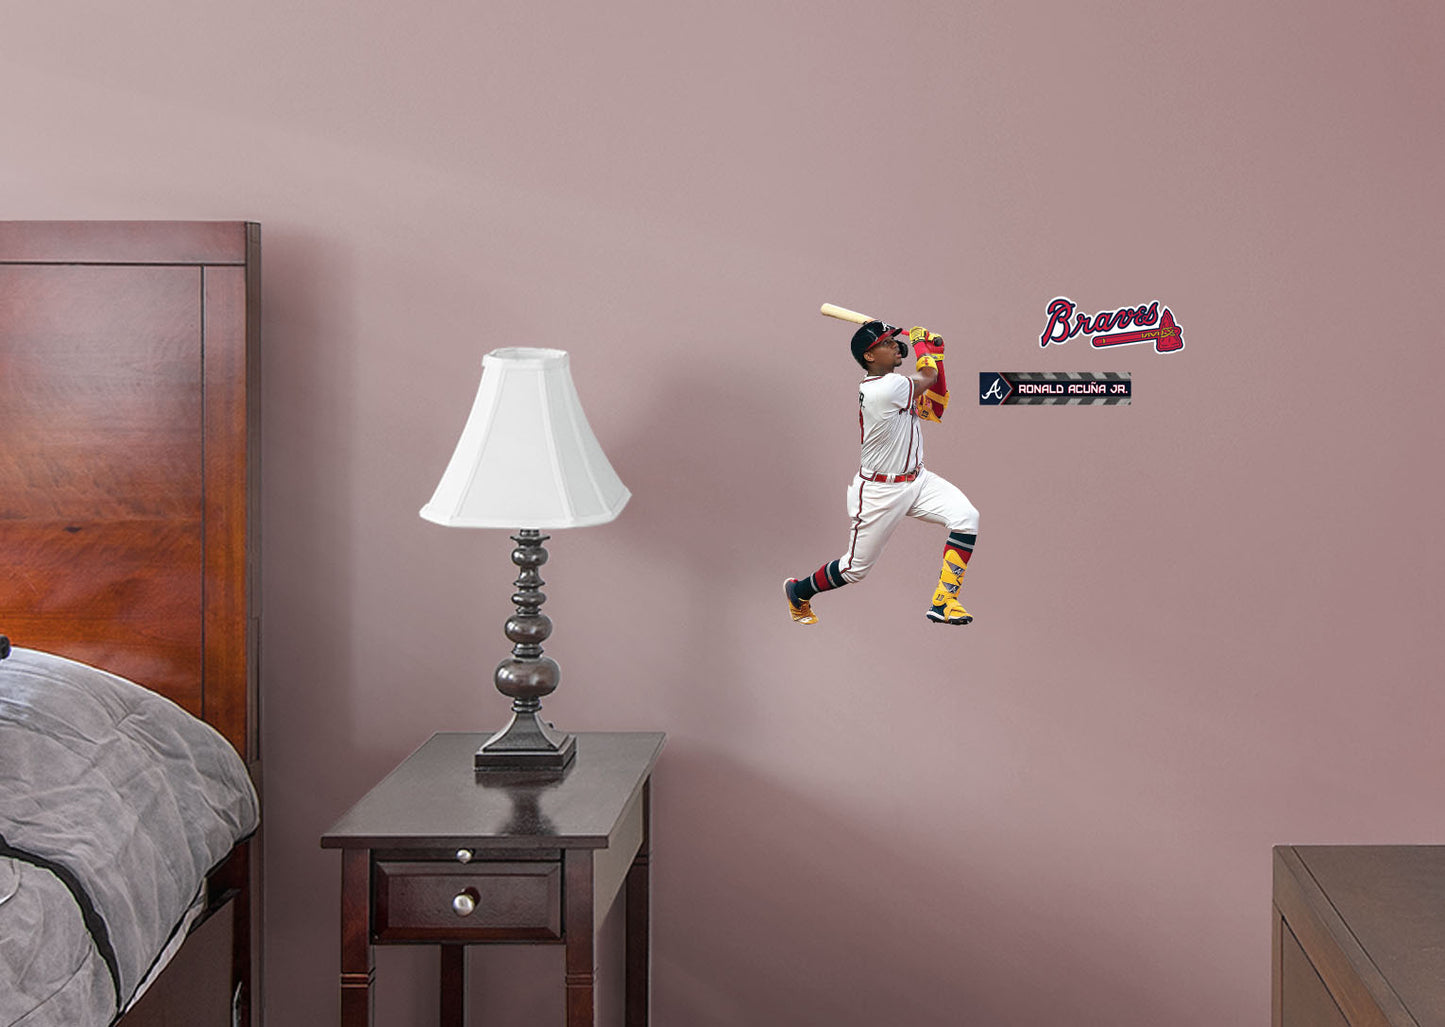 Atlanta Braves: Ronald Acuña Jr.         - Officially Licensed MLB Removable Wall   Adhesive Decal